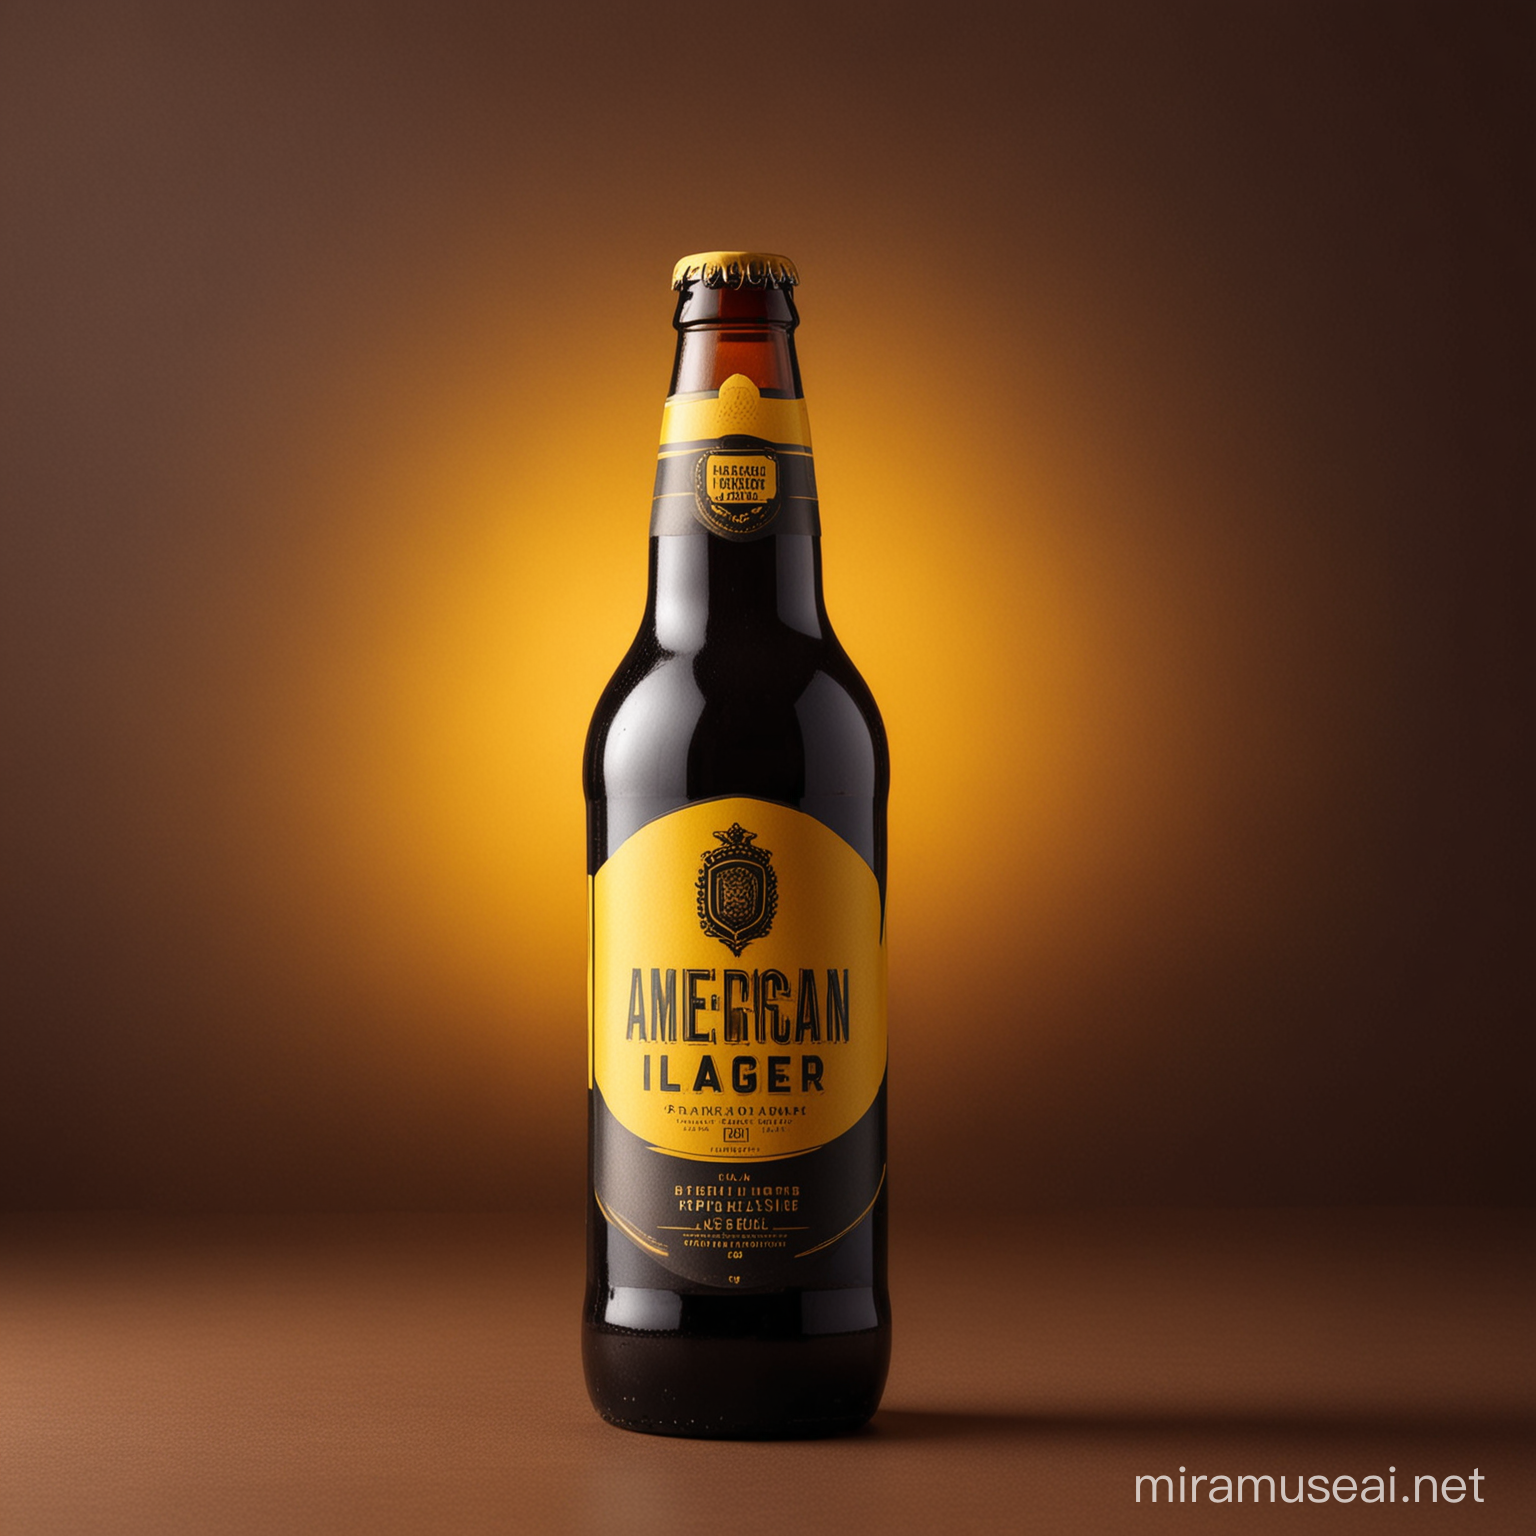 Modern craft brewery in a yellow background with a bottle in the middle of the picture. I want to showcase the beer of the week to customers and stakeholders. The beer style is American Dark Lager and the language is Portuguese. 